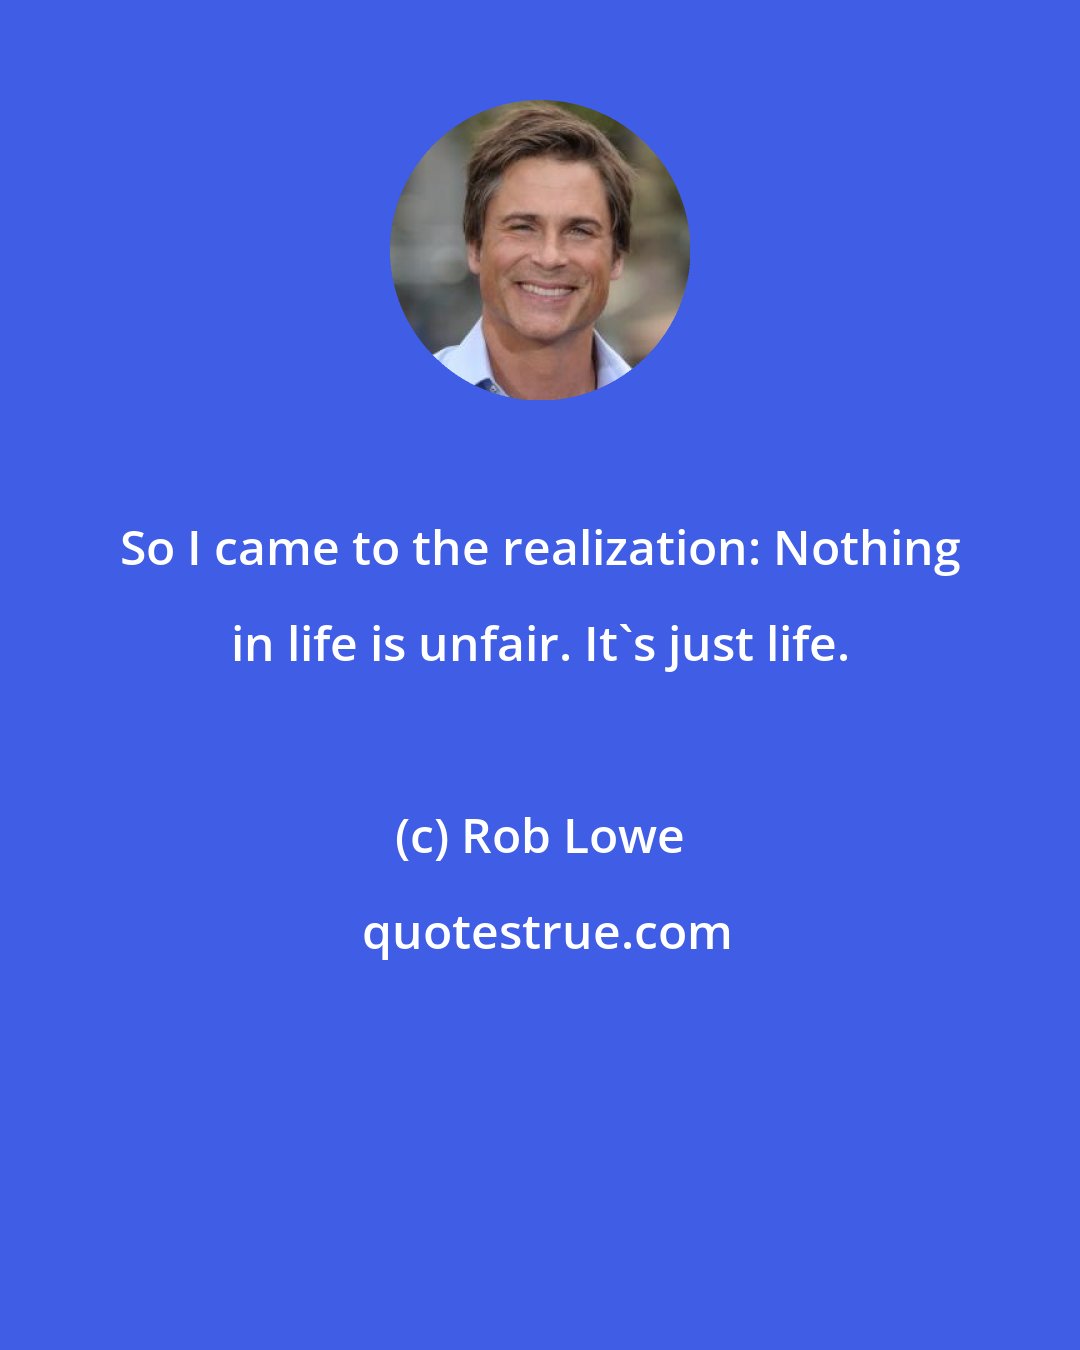 Rob Lowe: So I came to the realization: Nothing in life is unfair. It's just life.